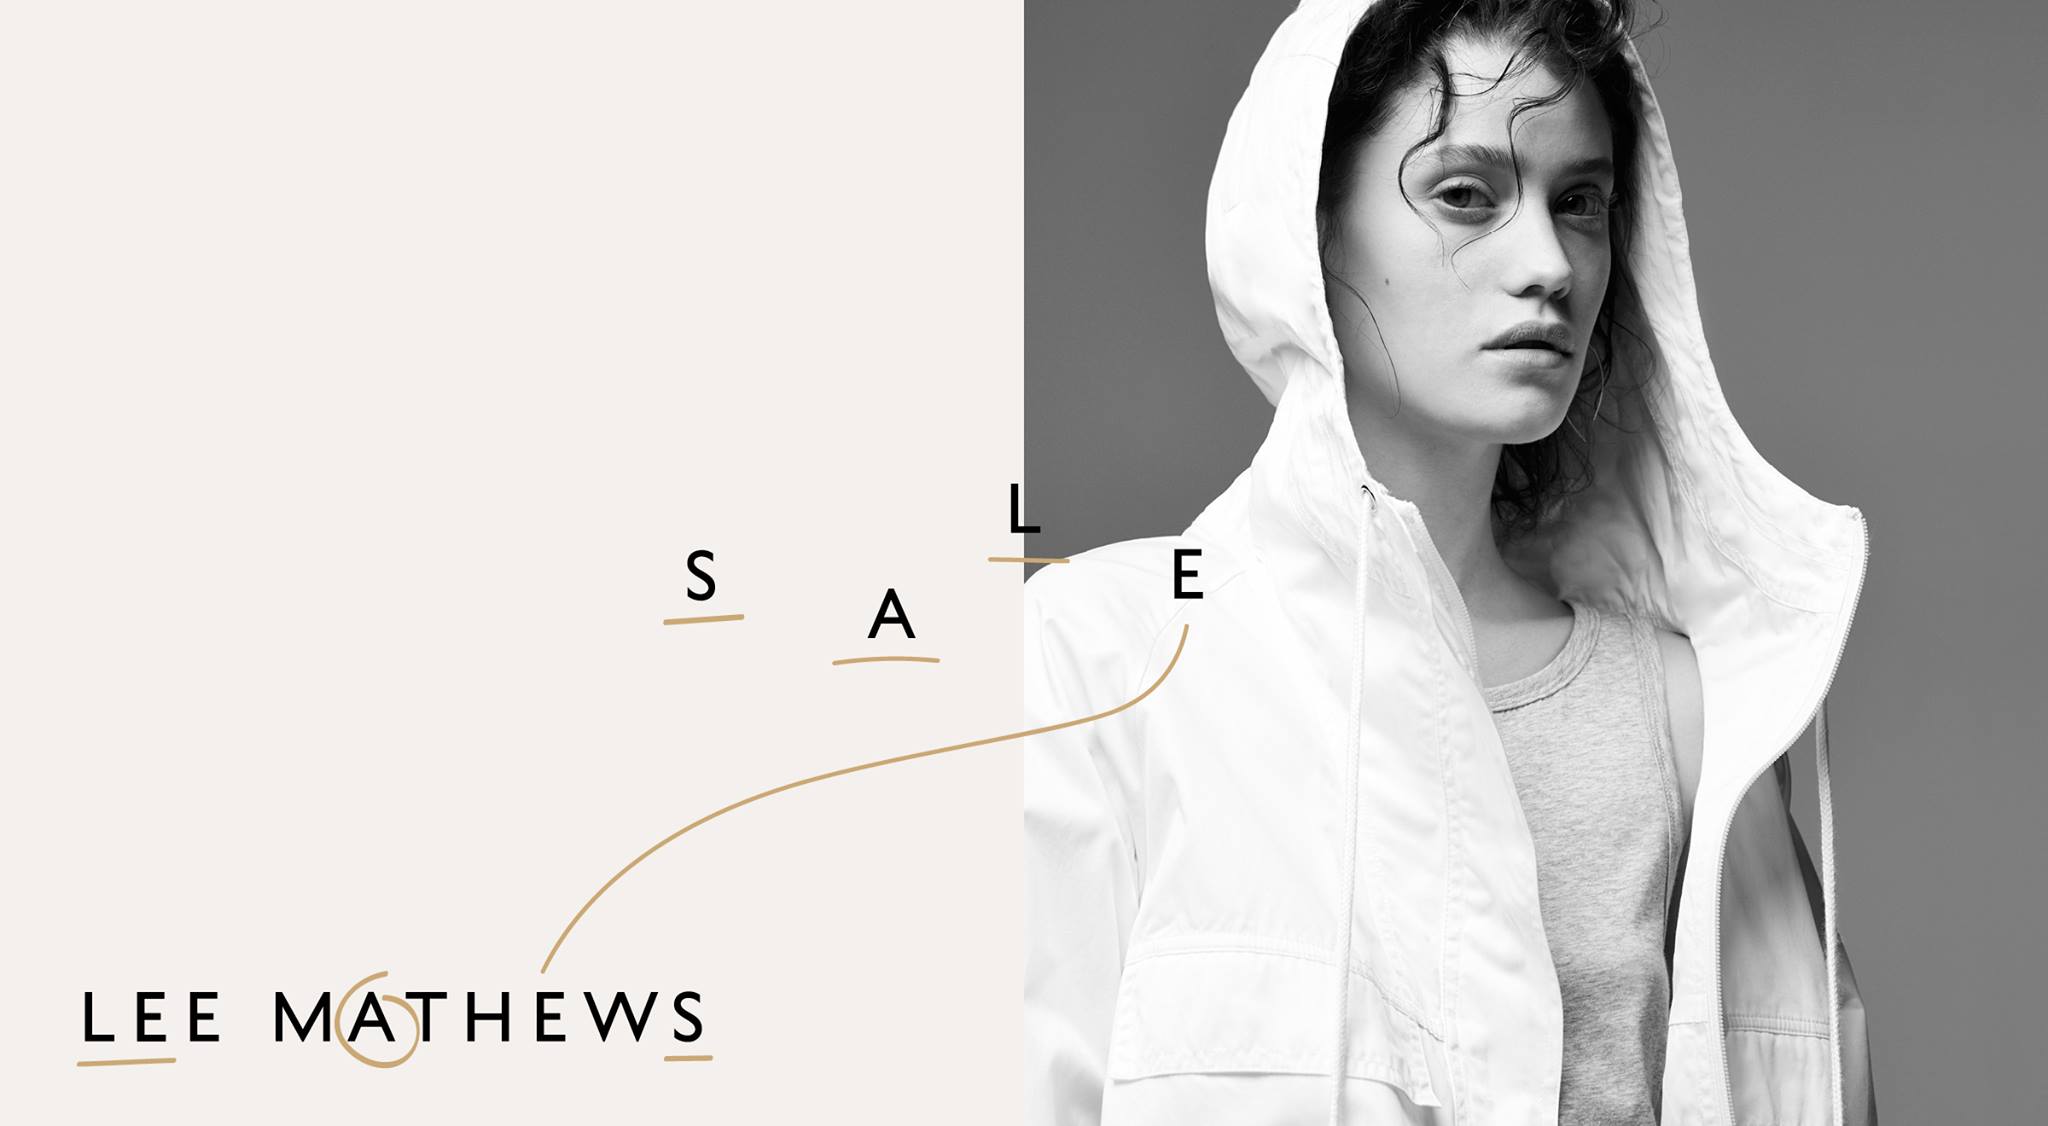 Lee Mathews up to 50% OFF on sale styles for clothing & accessories